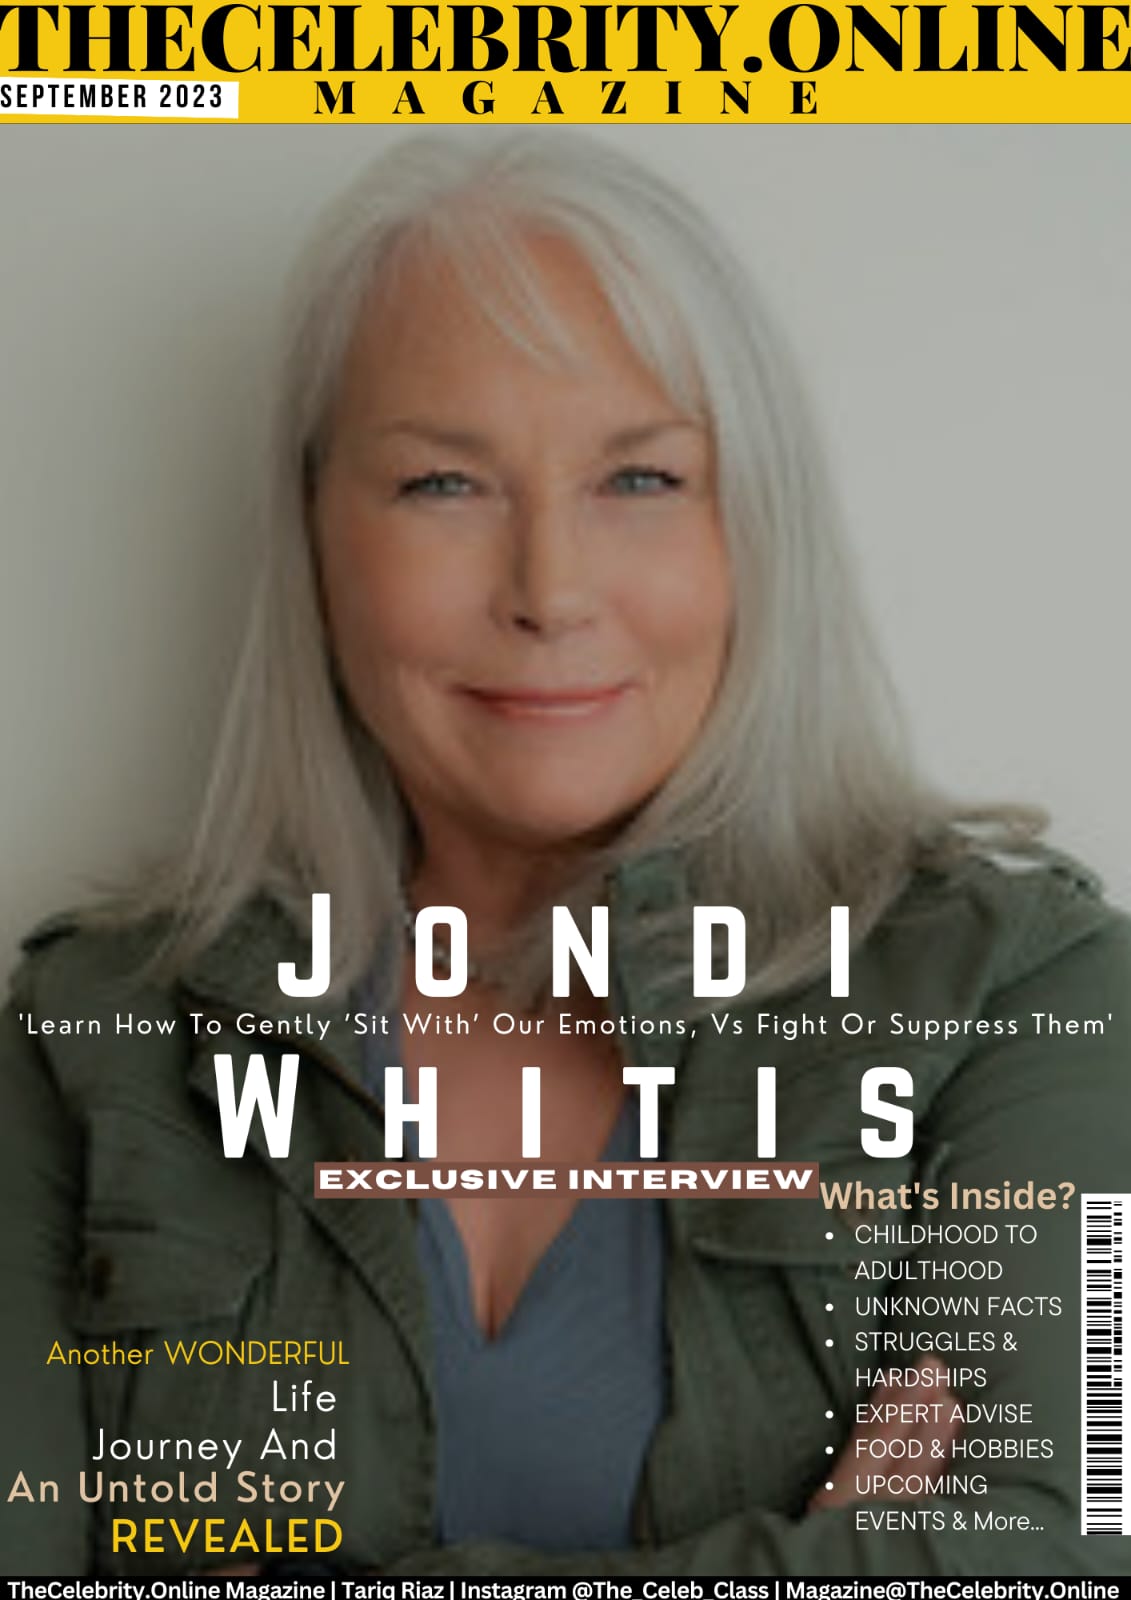 Jondi Whitis Exclusive Interview – ‘Learn How To Gently ’Sit With’ Our Emotions, Vs Fight Or Suppress Them’